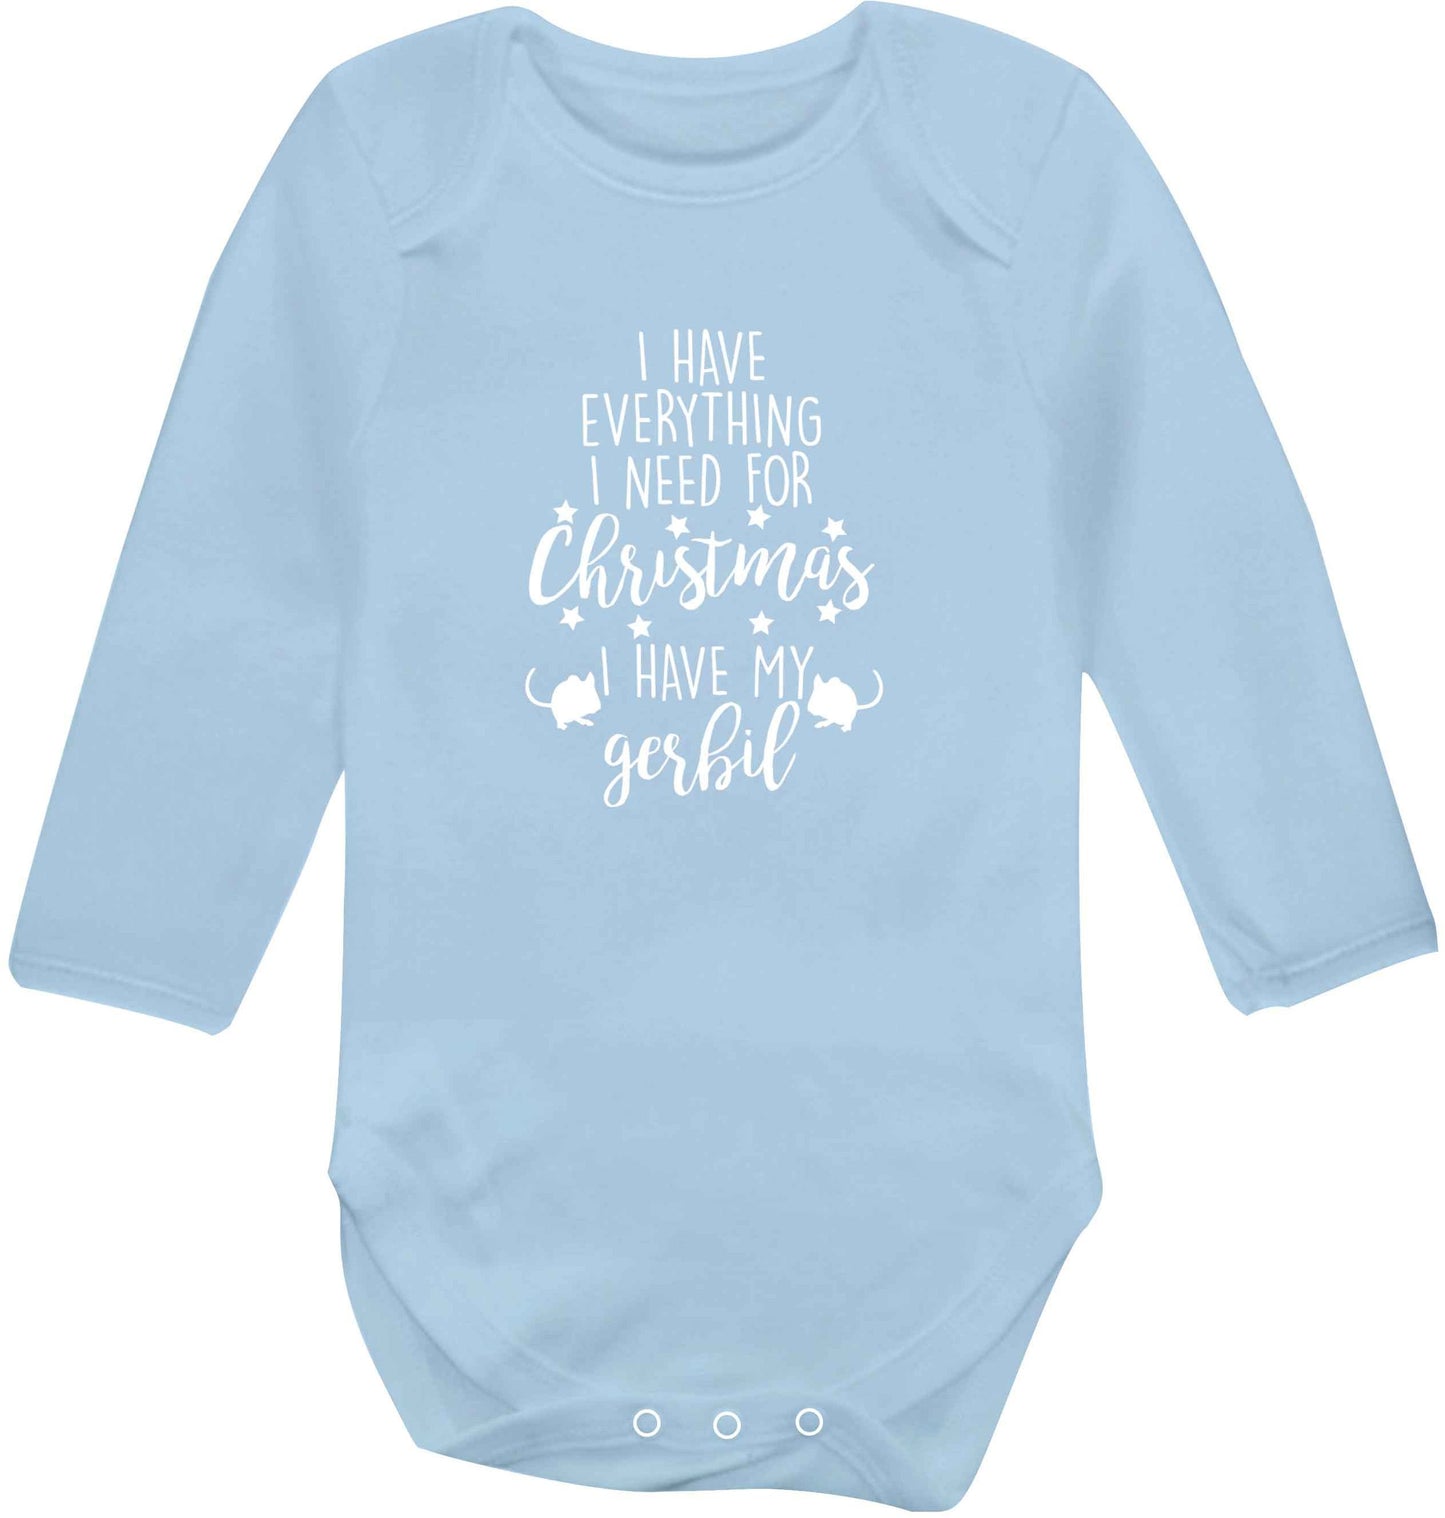 I have everything I need for Christmas I have my gerbil baby vest long sleeved pale blue 6-12 months